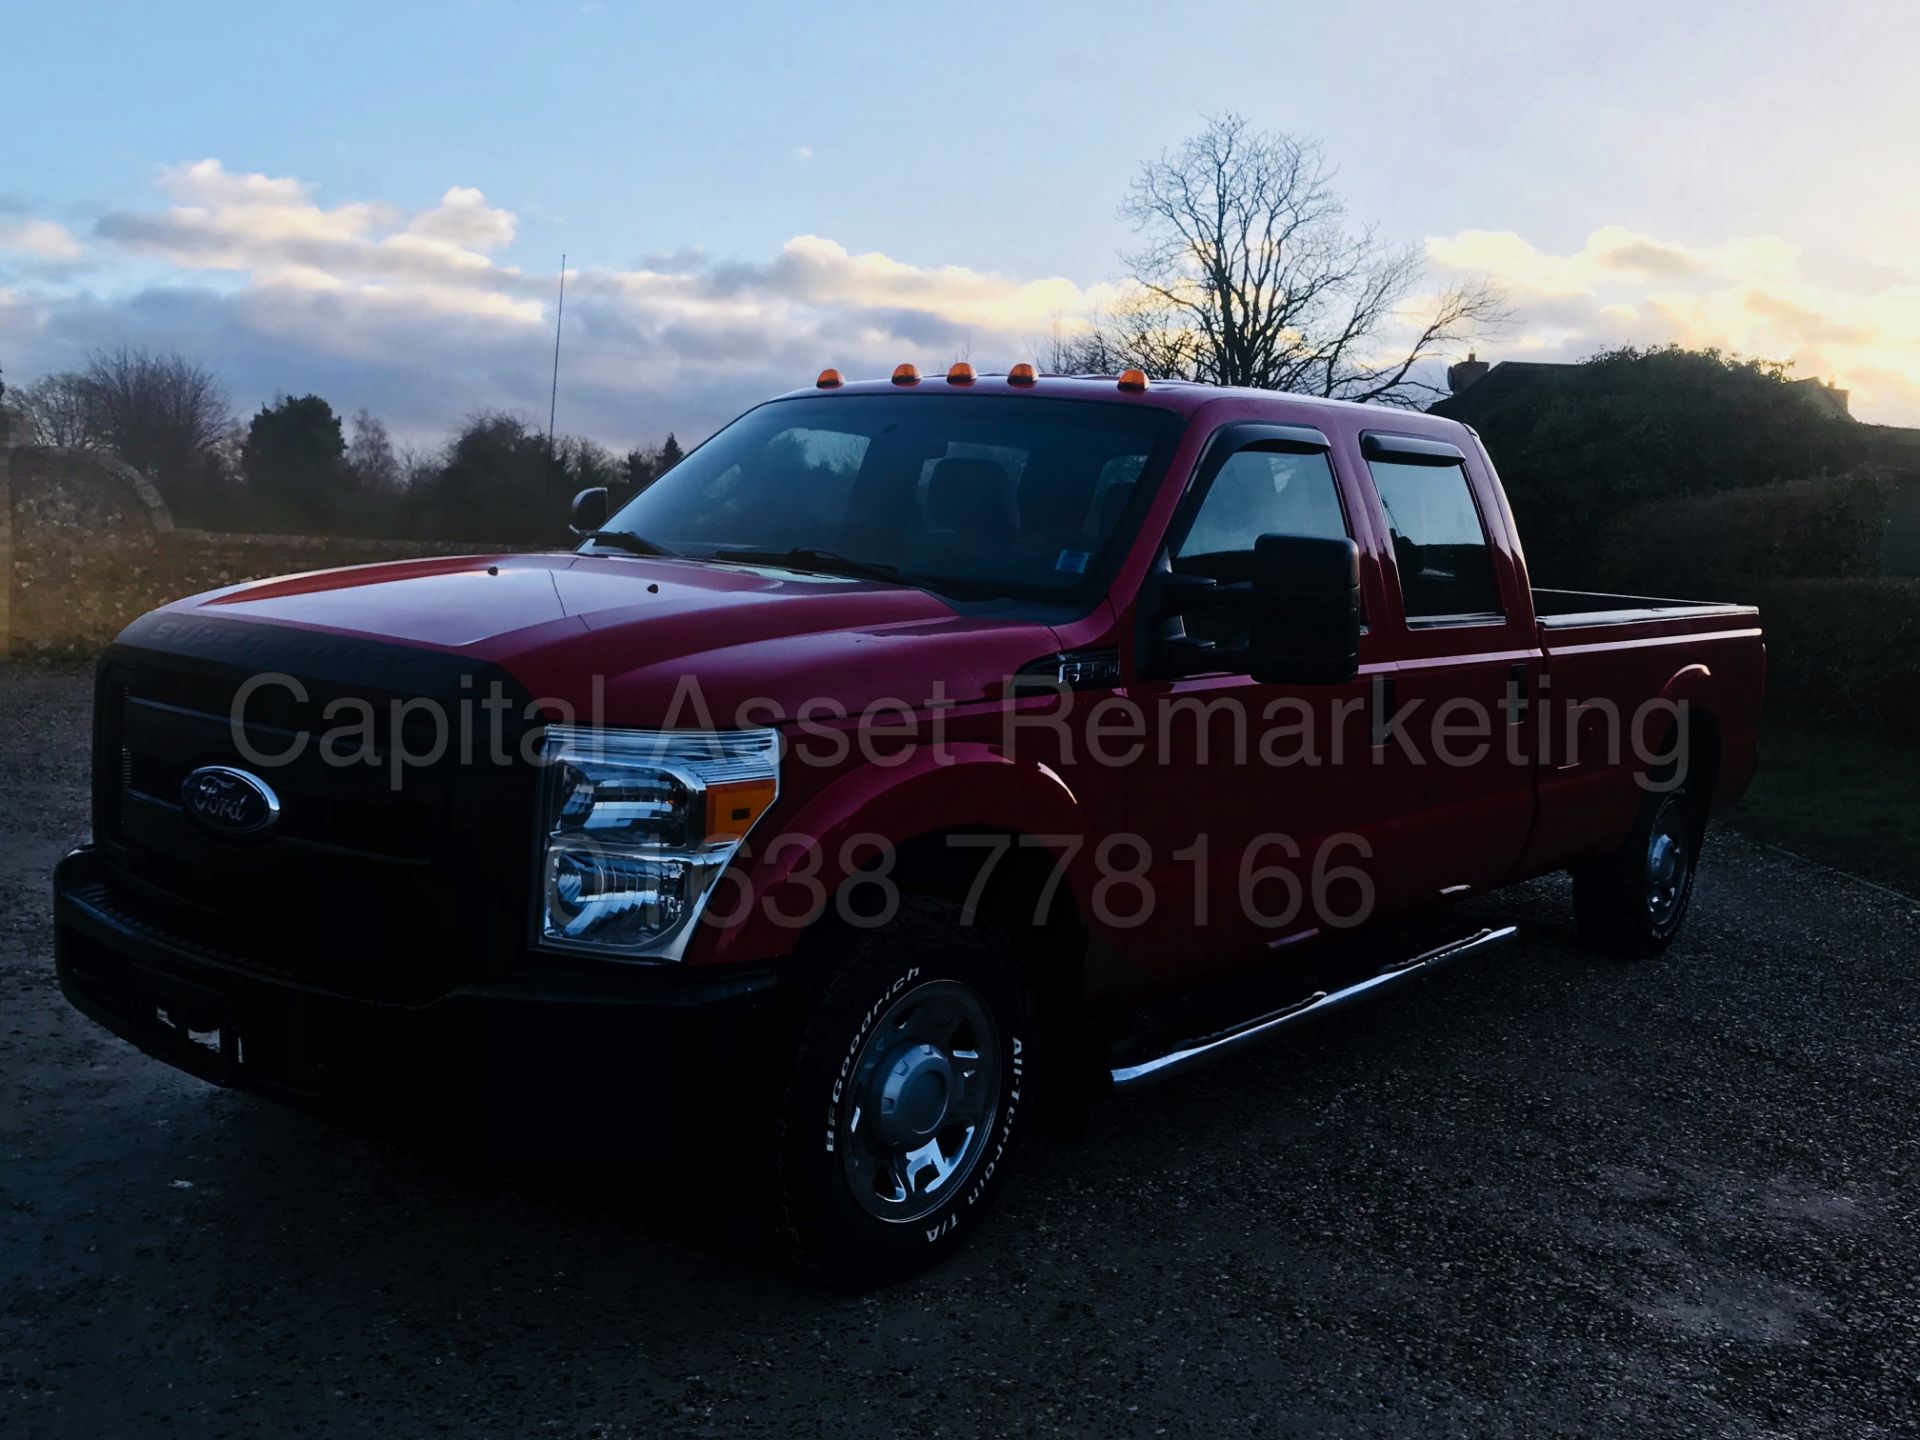 (On Sale) FORD F-250 SUPER DUTY 6.2 V8 FLEX FUEL (2011) XL - DOUBLE CAB PICK-UP **AIR CON - AUTO** - Image 8 of 27